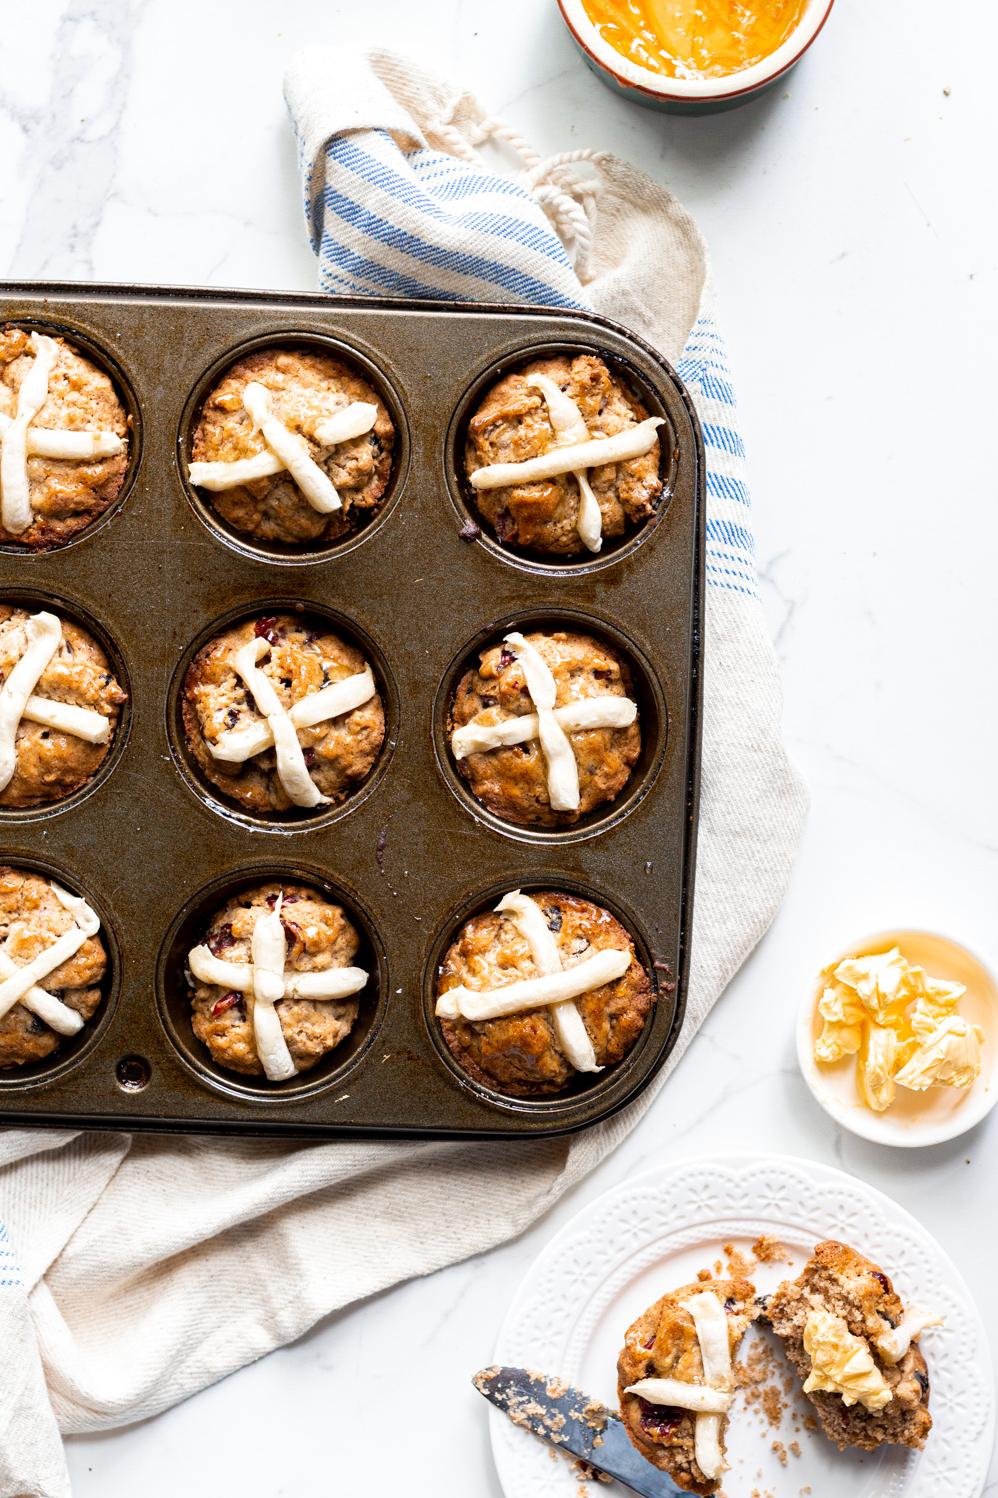  Treat yourself to these gluten-free muffins that are packed with nutrients and flavor.